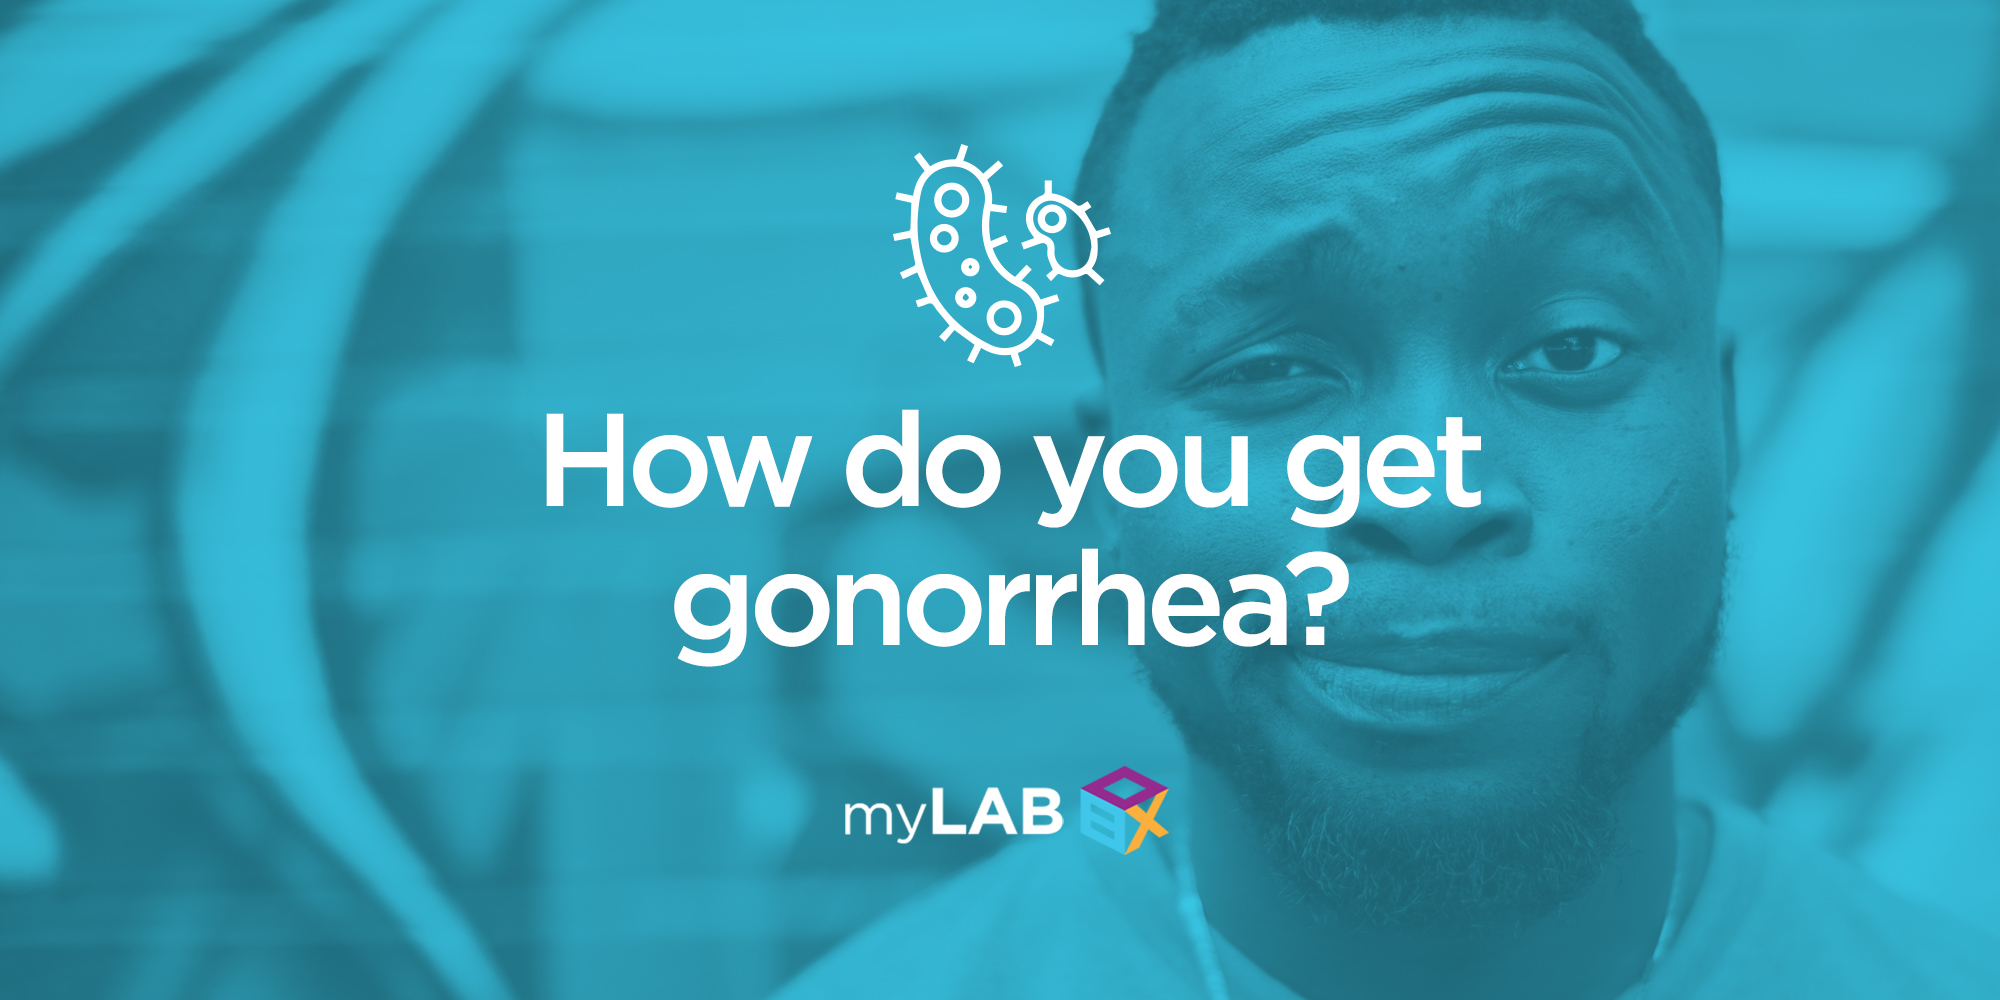 How Do You Get Gonorrhea?